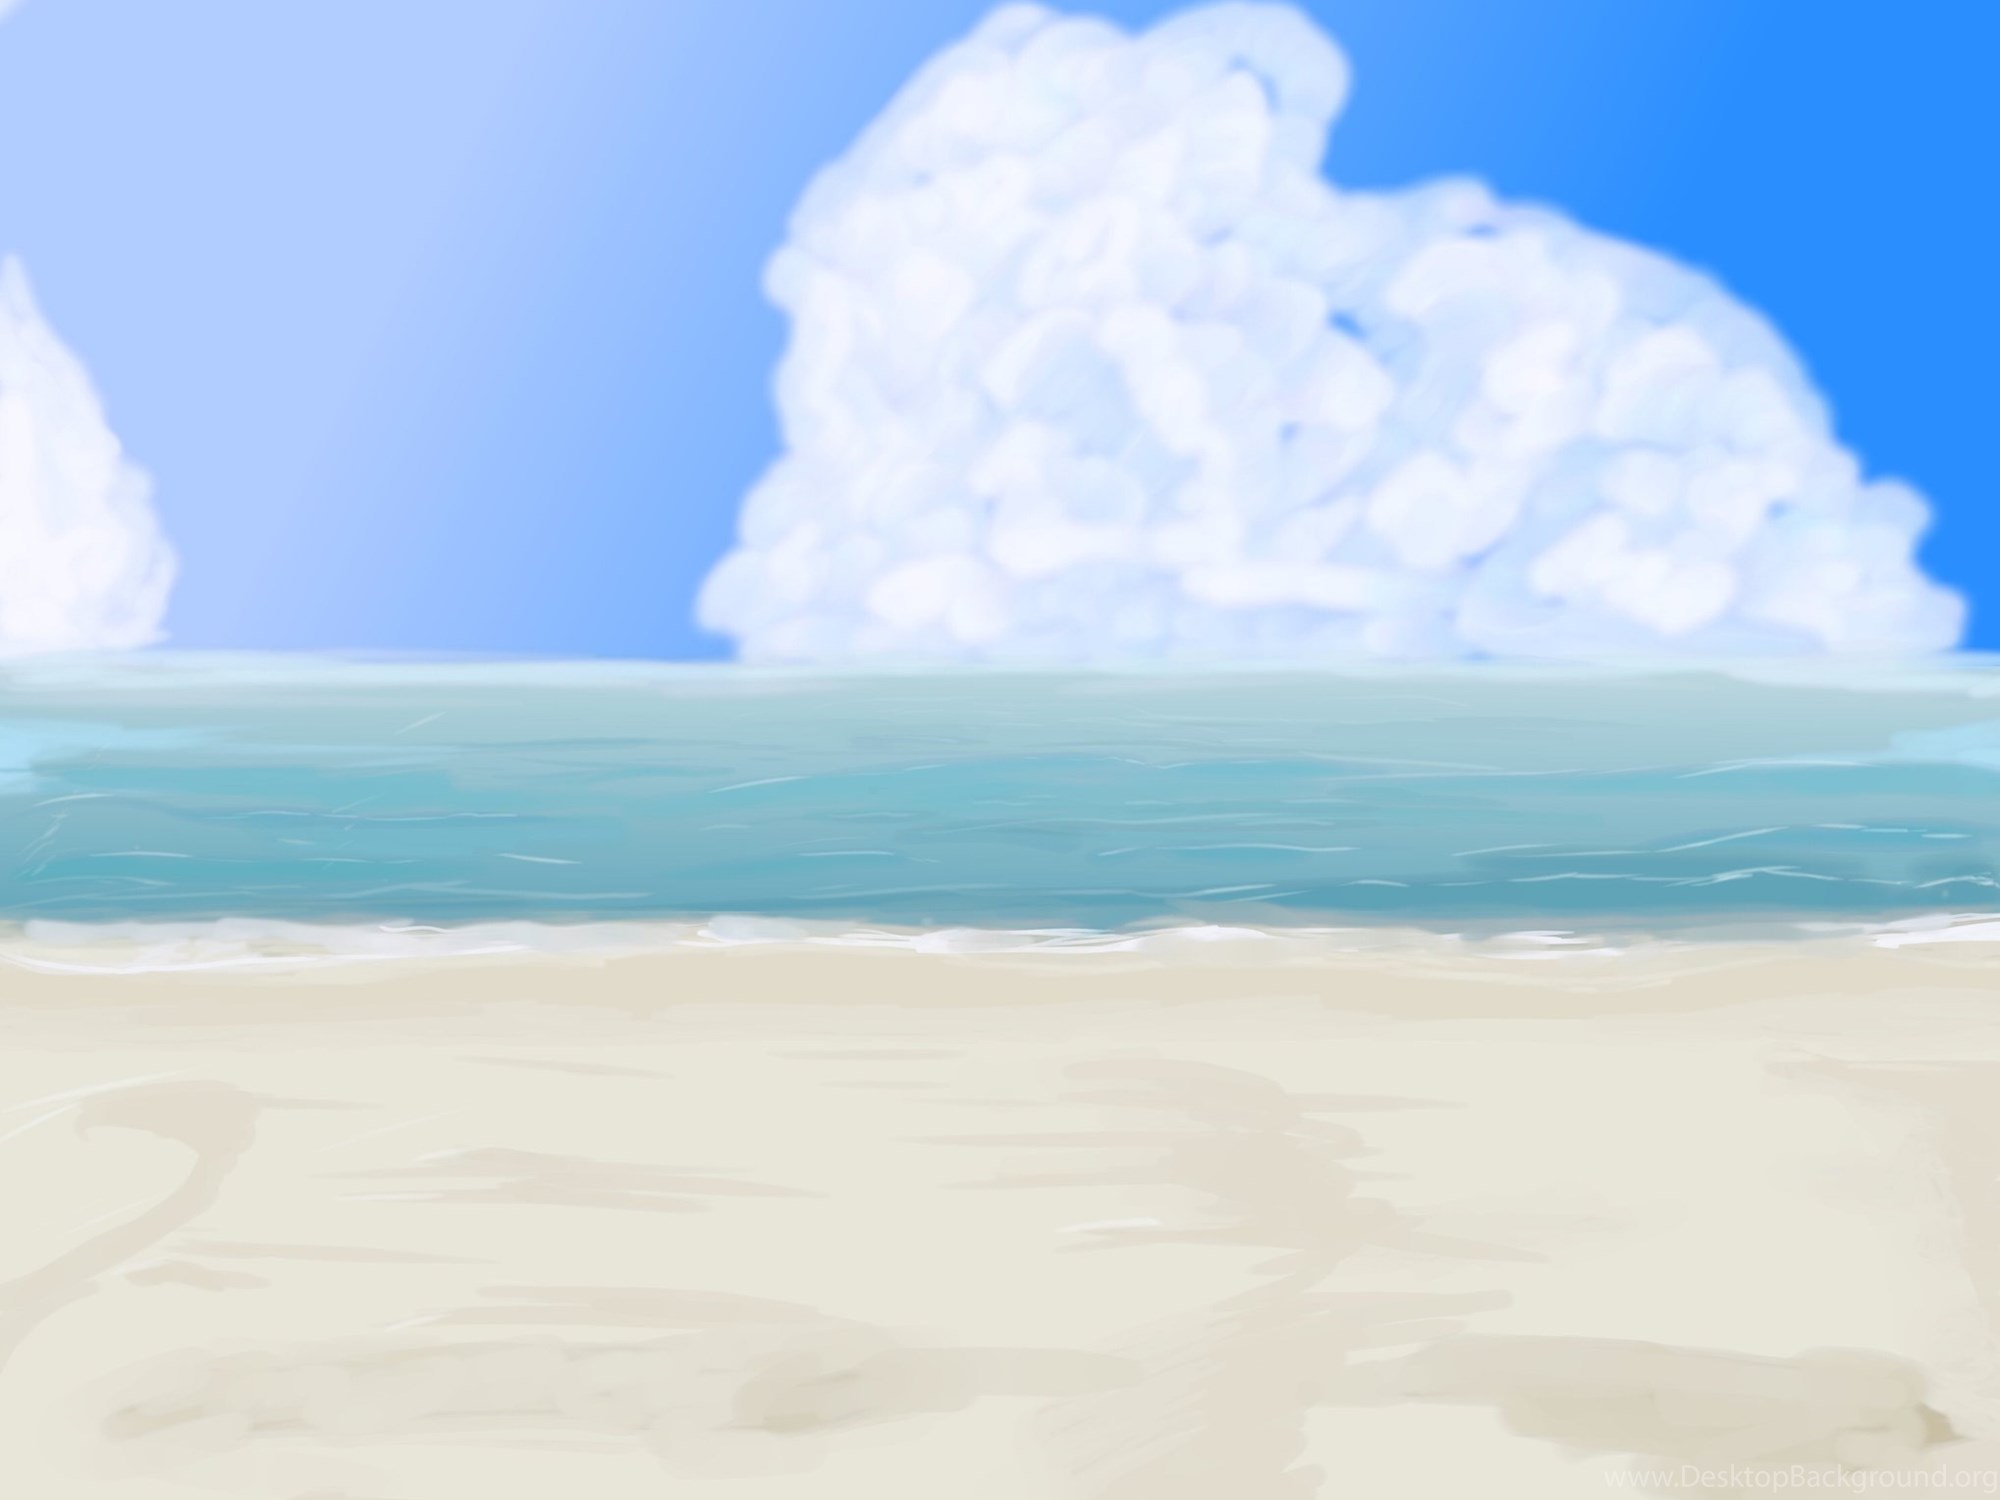 Download Anime Style Beach Backgrounds By Wbd On DeviantArt Fullscreen Stan...